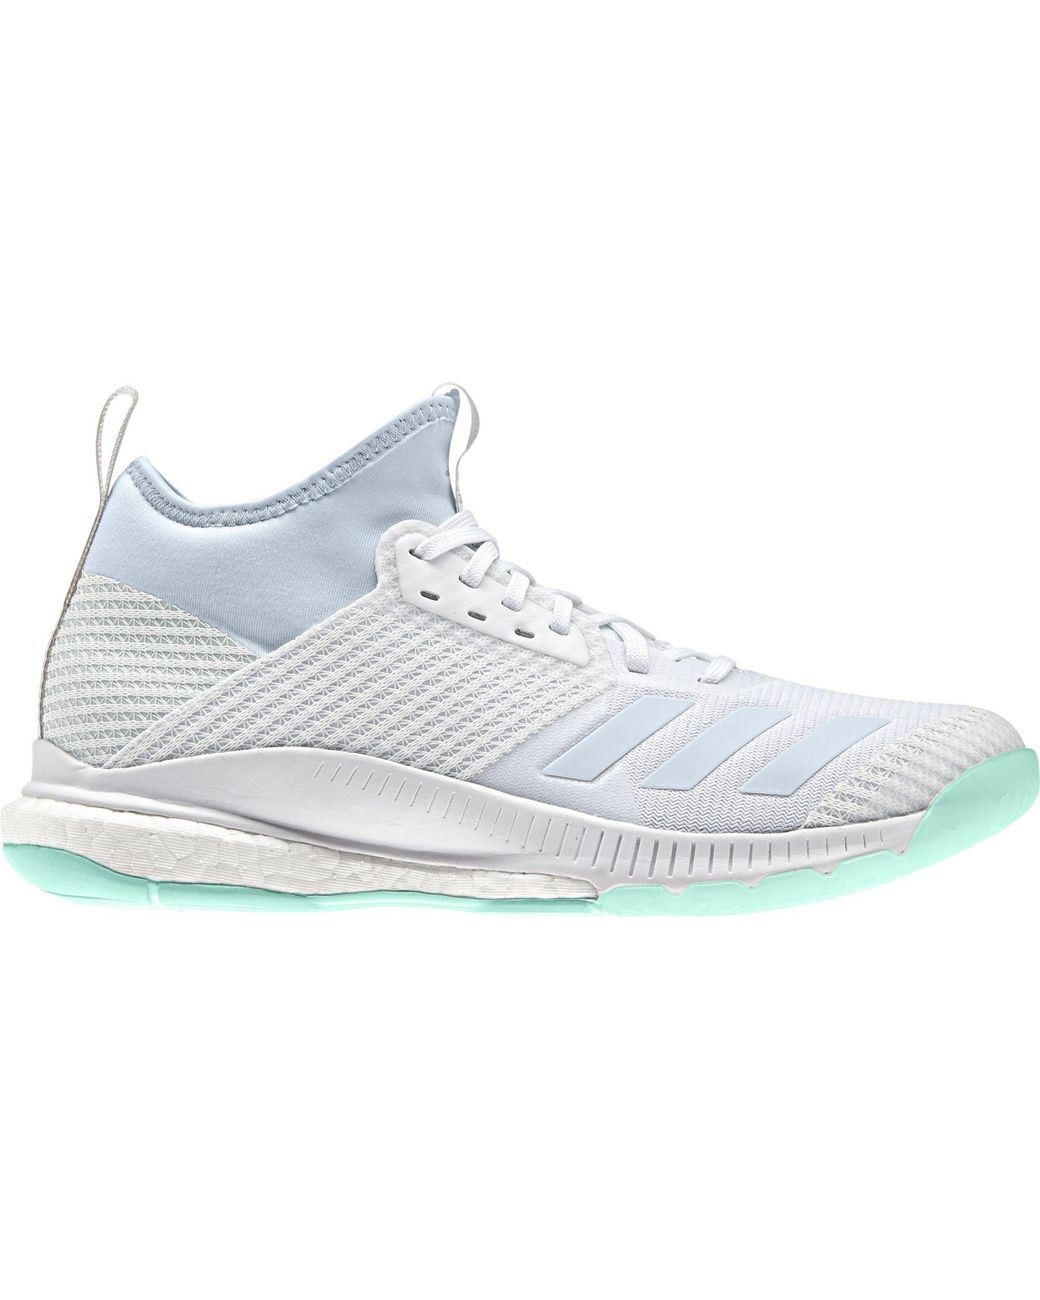 adidas Lace Crazyflight X Mid Volleyball Shoes in White/Mint (Green) | Lyst